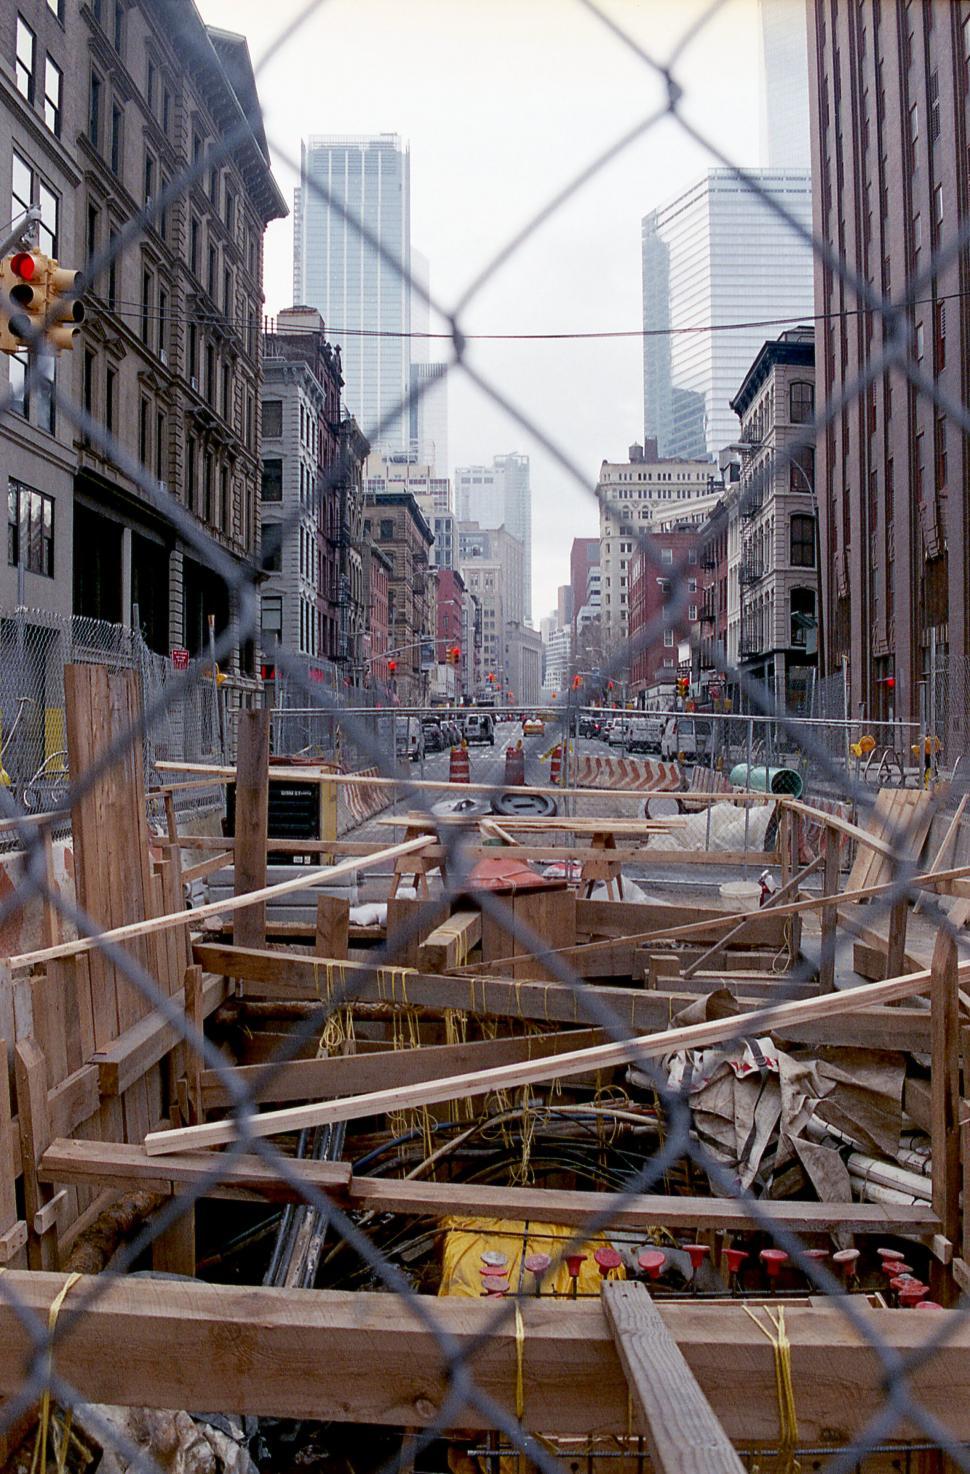 Free Image of Construction site in urban environment 